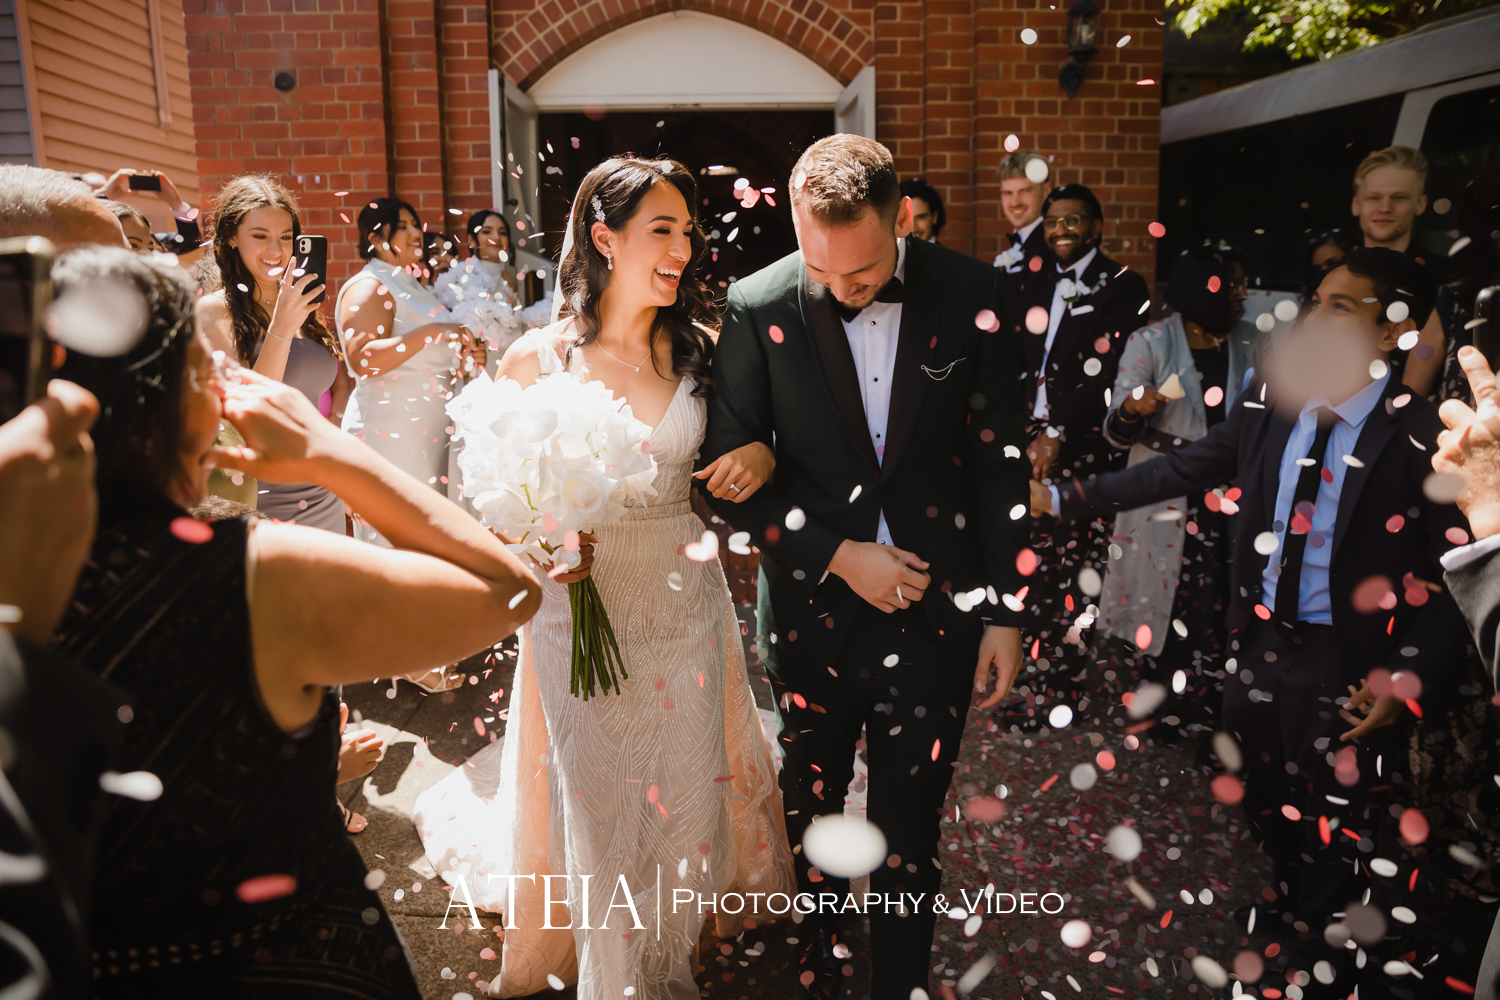 , Chelsea and Adam&#8217;s wedding photography at Grand Hyatt Melbourne captured by ATEIA Photography &#038; Video